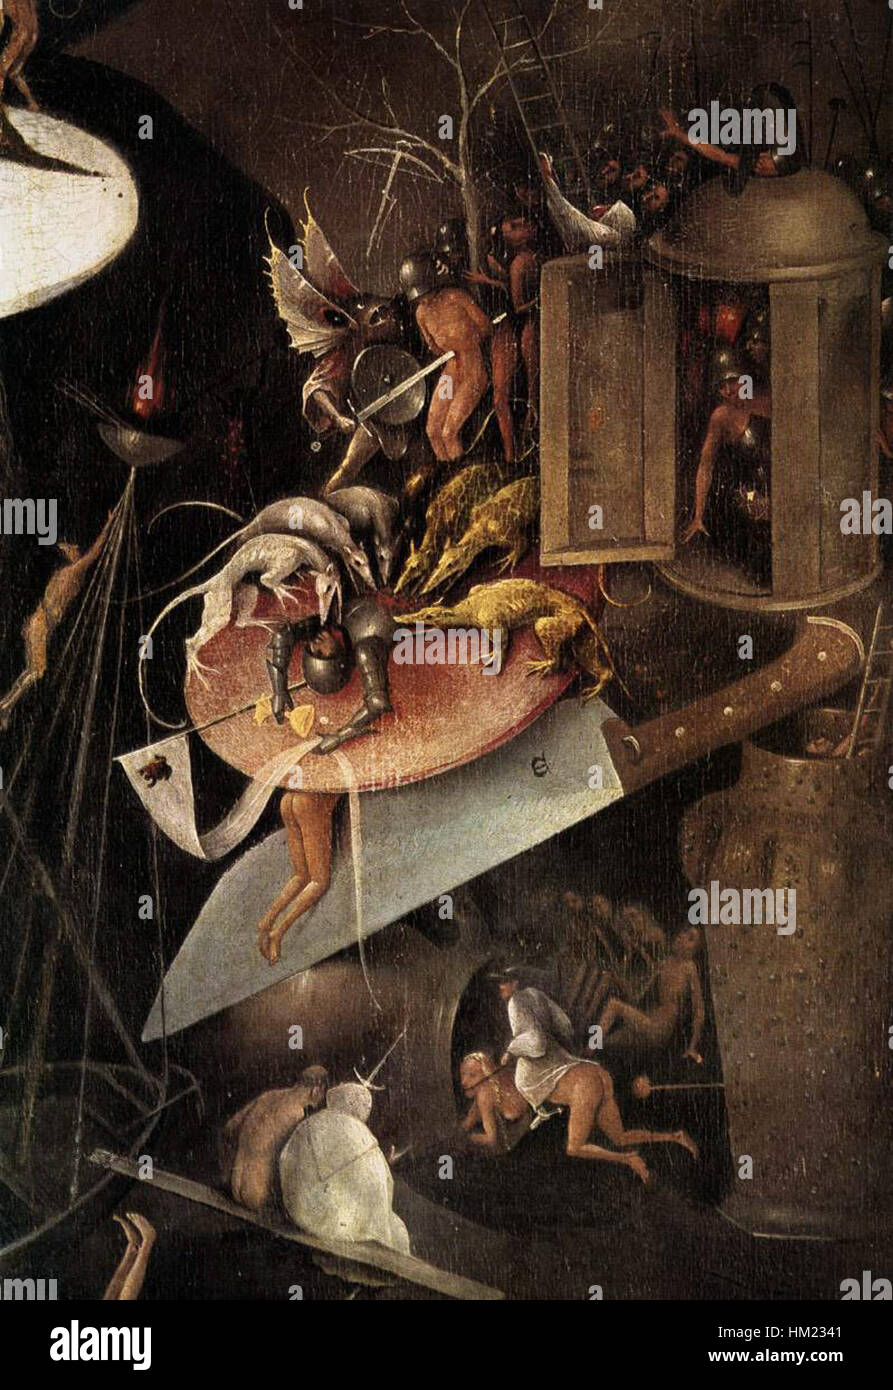 Hieronymus Bosch - Triptych of Garden of Earthly Delights (detail) - WGA2528 Stock Photo